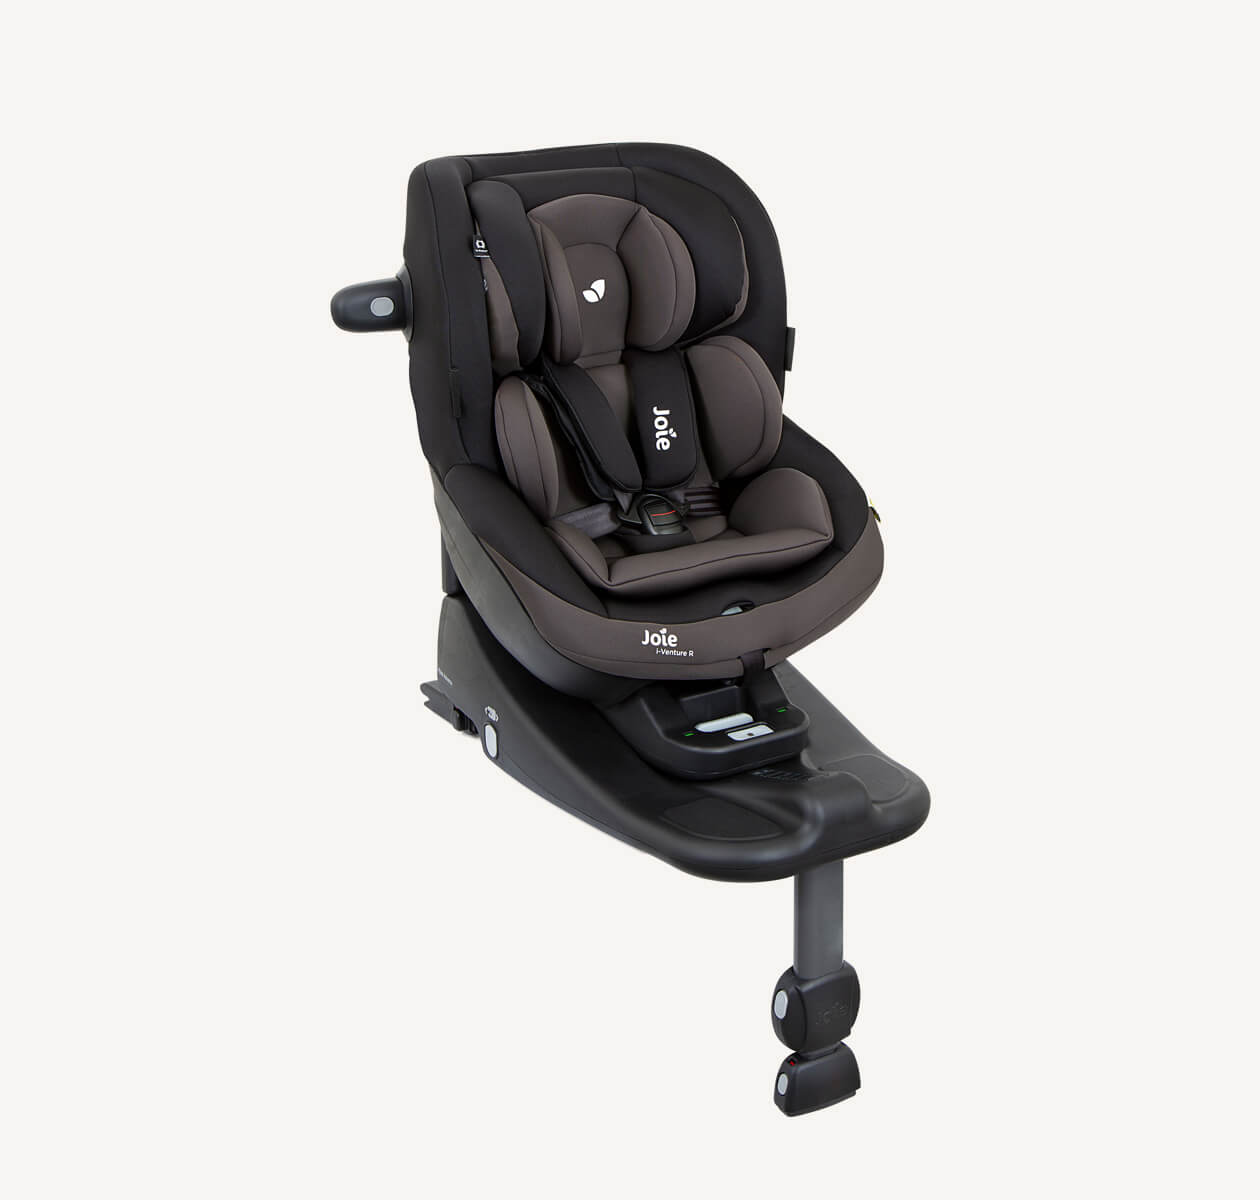  Joie I-Venture R toddler car seat in a two tone black color, attached to the I-Base Advance ISOFIX base, facing toward the right at an angle.